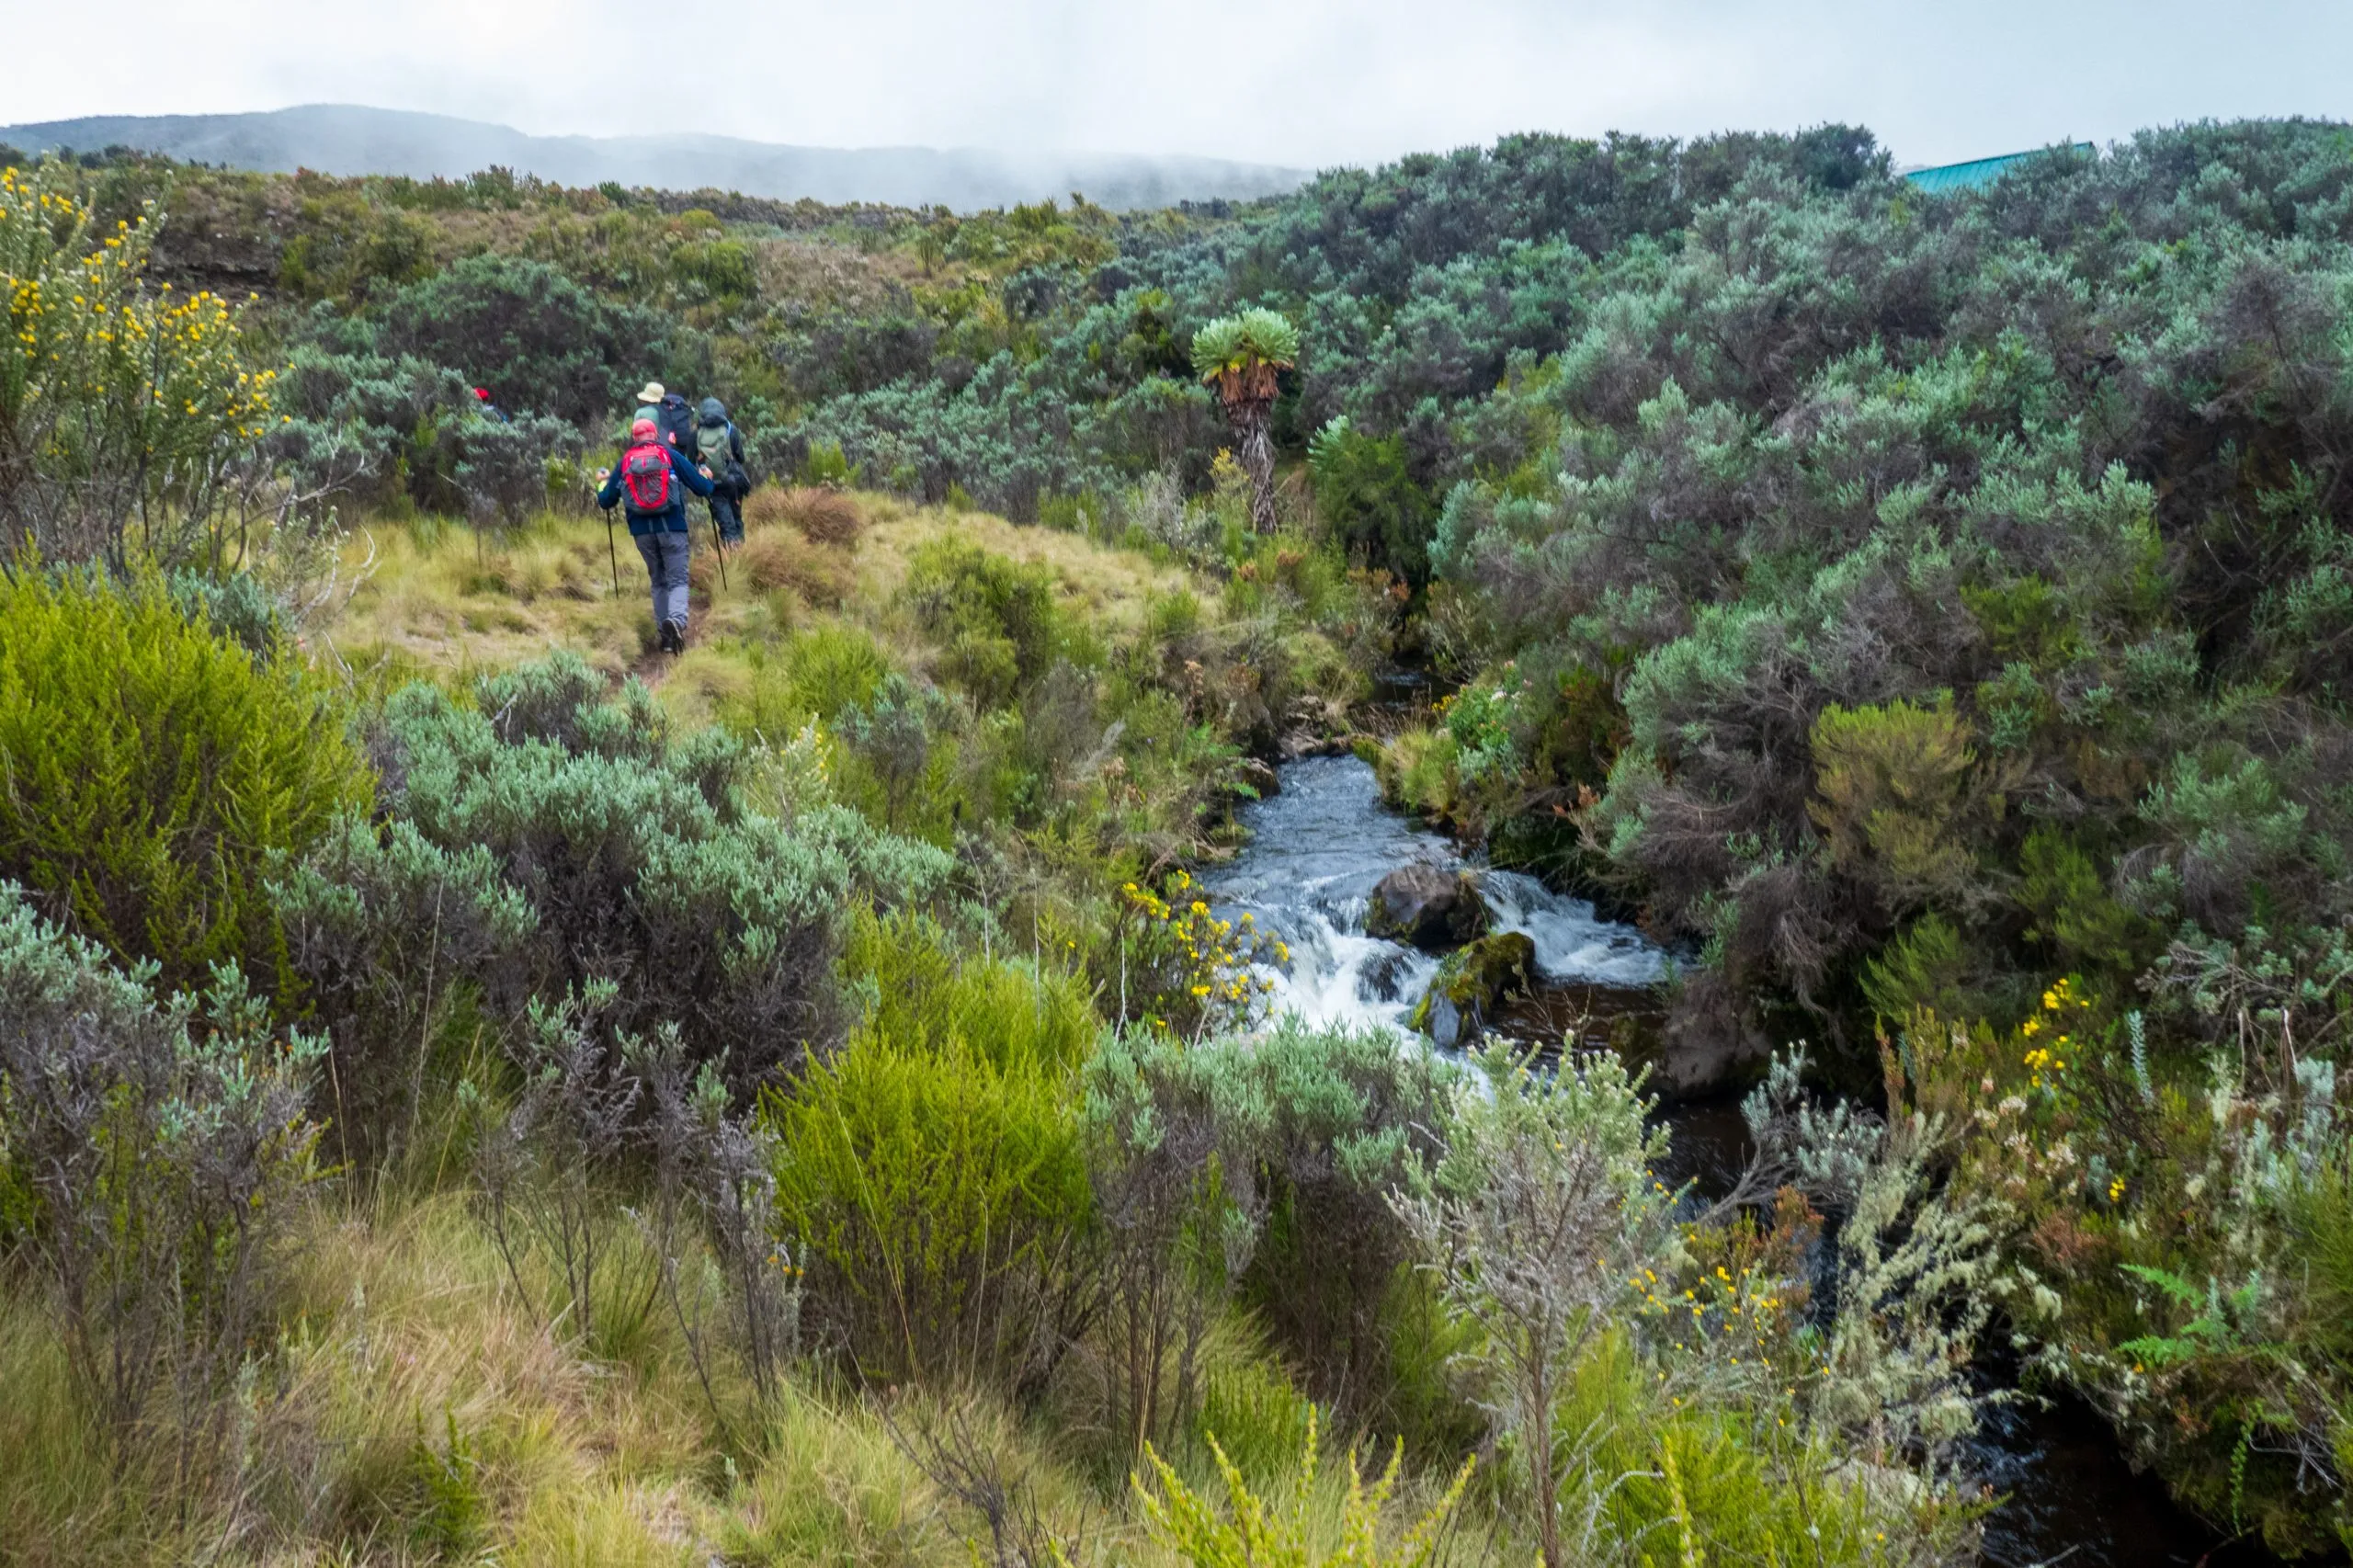 Rear view of a group of hikers walking along a river at Chogoria Route, Mount Kenya, Kenya